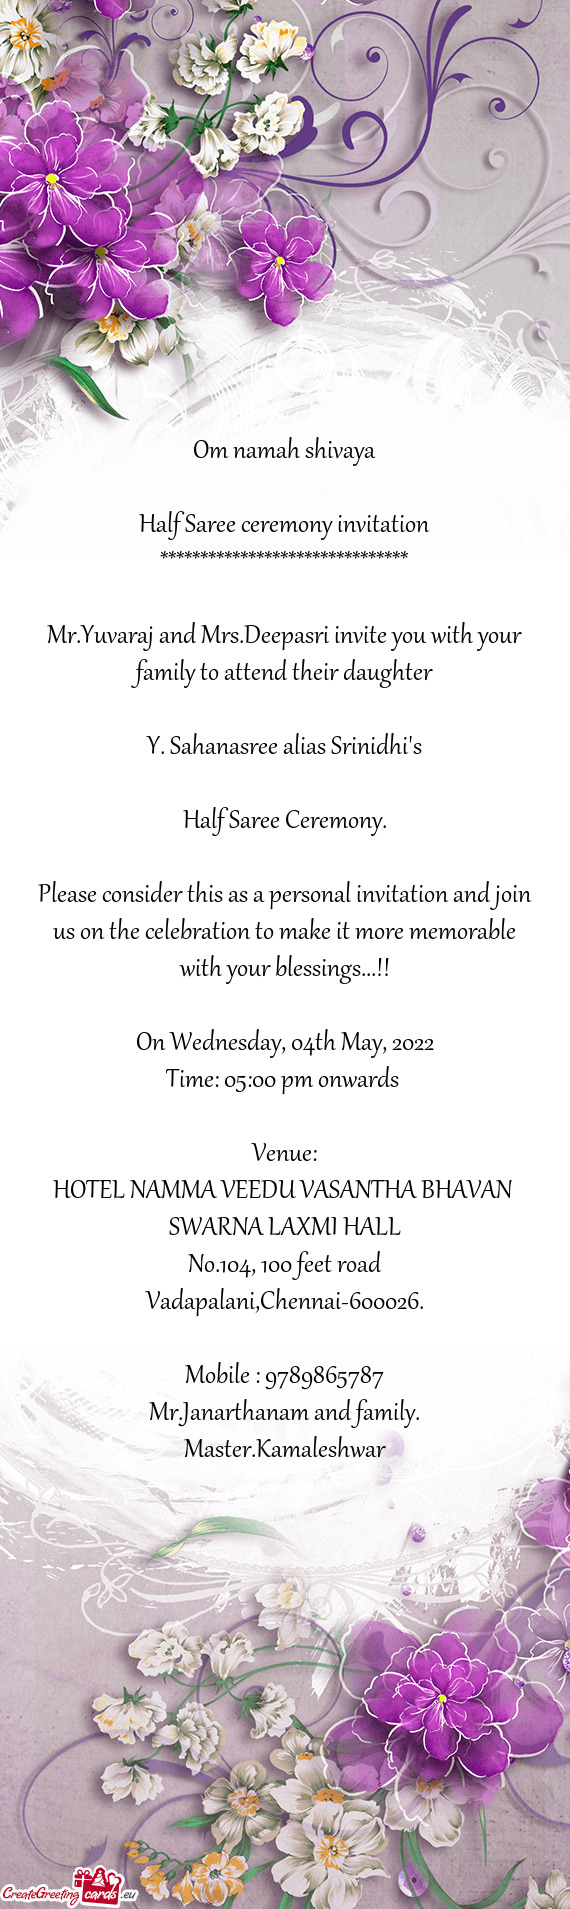 Mr.Yuvaraj and Mrs.Deepasri invite you with your family to attend their daughter